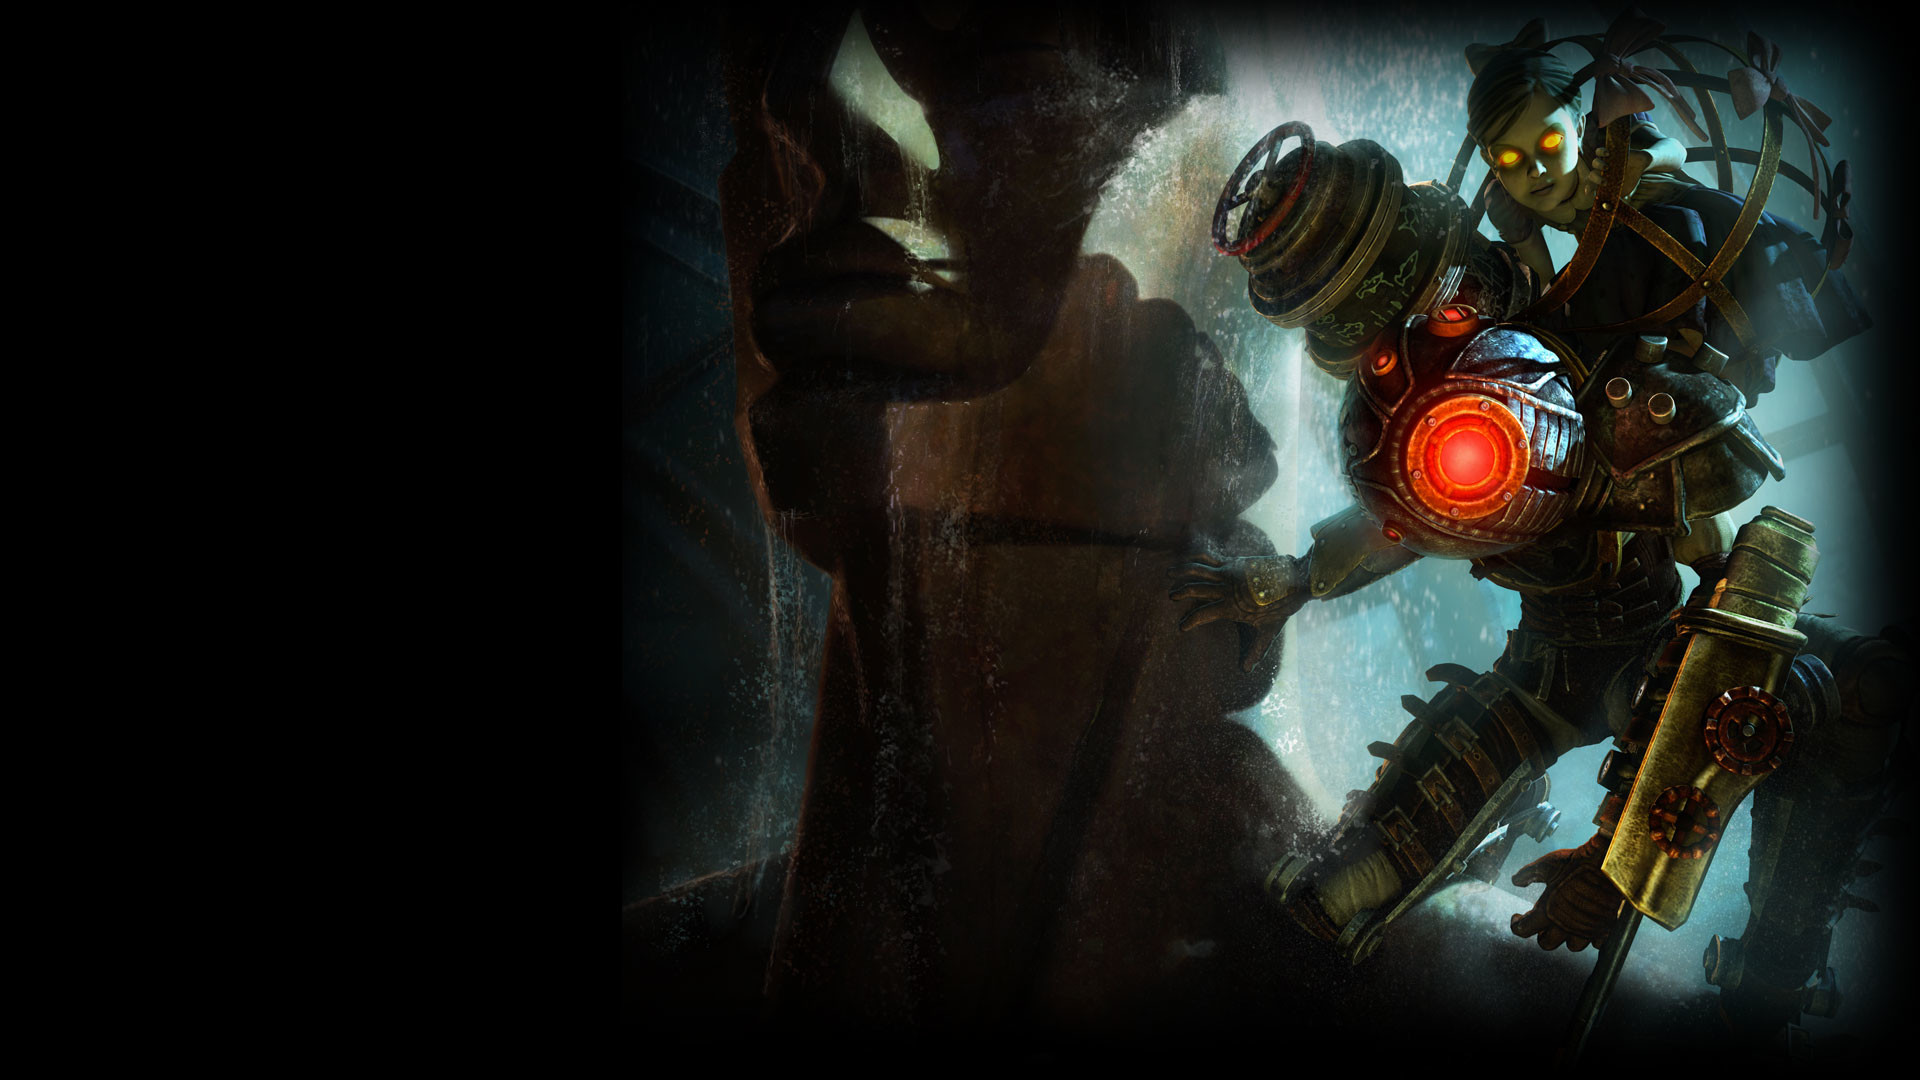 1920x1080 BioShock 2 Remastered Profile Background. View Full Size